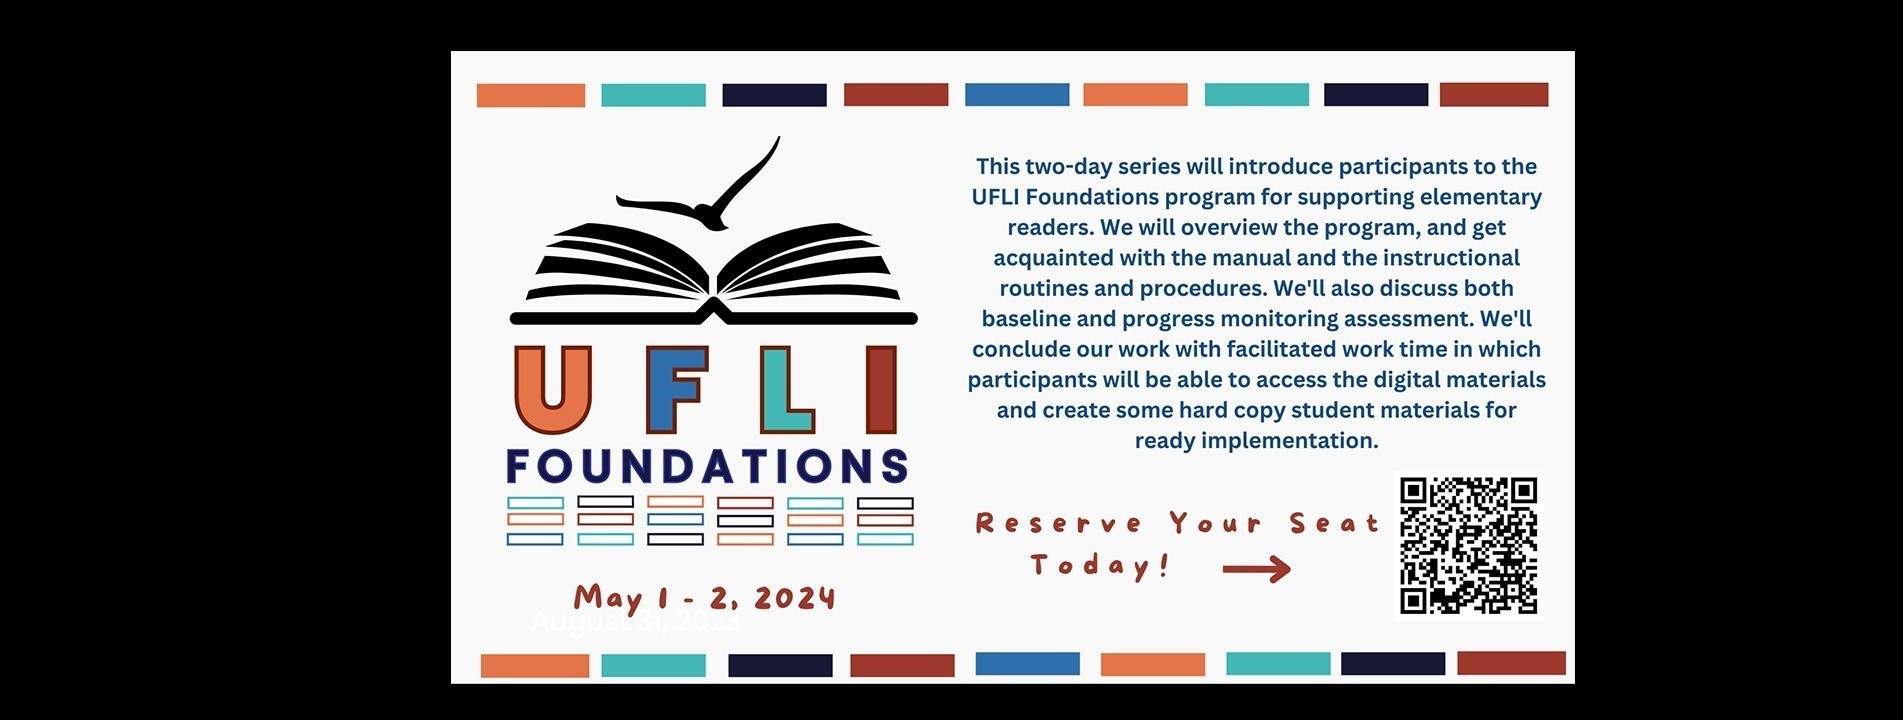 UFLI Foundations. May 1 - 2, 2024. This two-day series will introduce participants to the UFLI Foundations program for supporting elementary readers. We will overview the program, and get acquainted with the manual and the instructional routines and procedures. We&#39;ll also discuss both baseline and progress monitoring assessment. We&#39;ll conclude our work with facilitated work time in which participants will be able to access the digital materials and create some hard copy student materials for ready implementation.